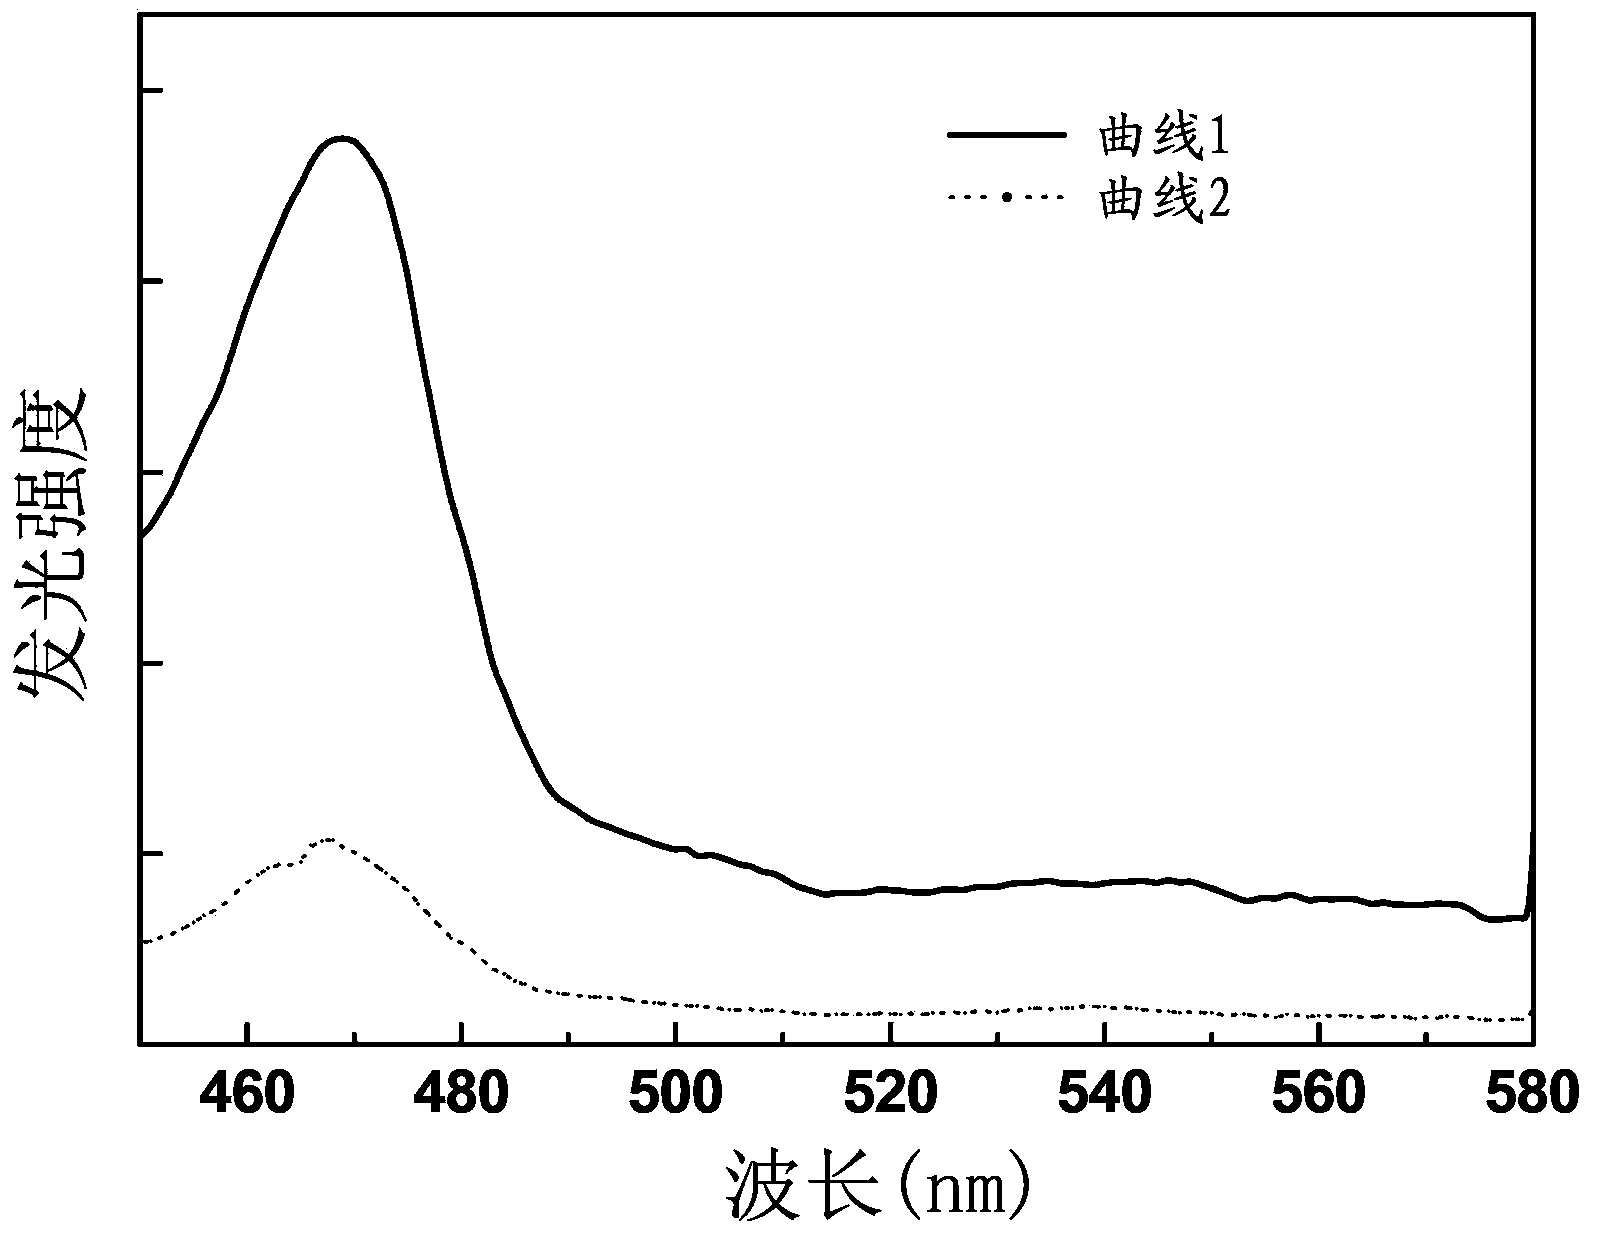 Neodymium-and-ytterbium-codoped alkaline earth fluoride glass up-conversion luminescent material, and preparation method and application thereof